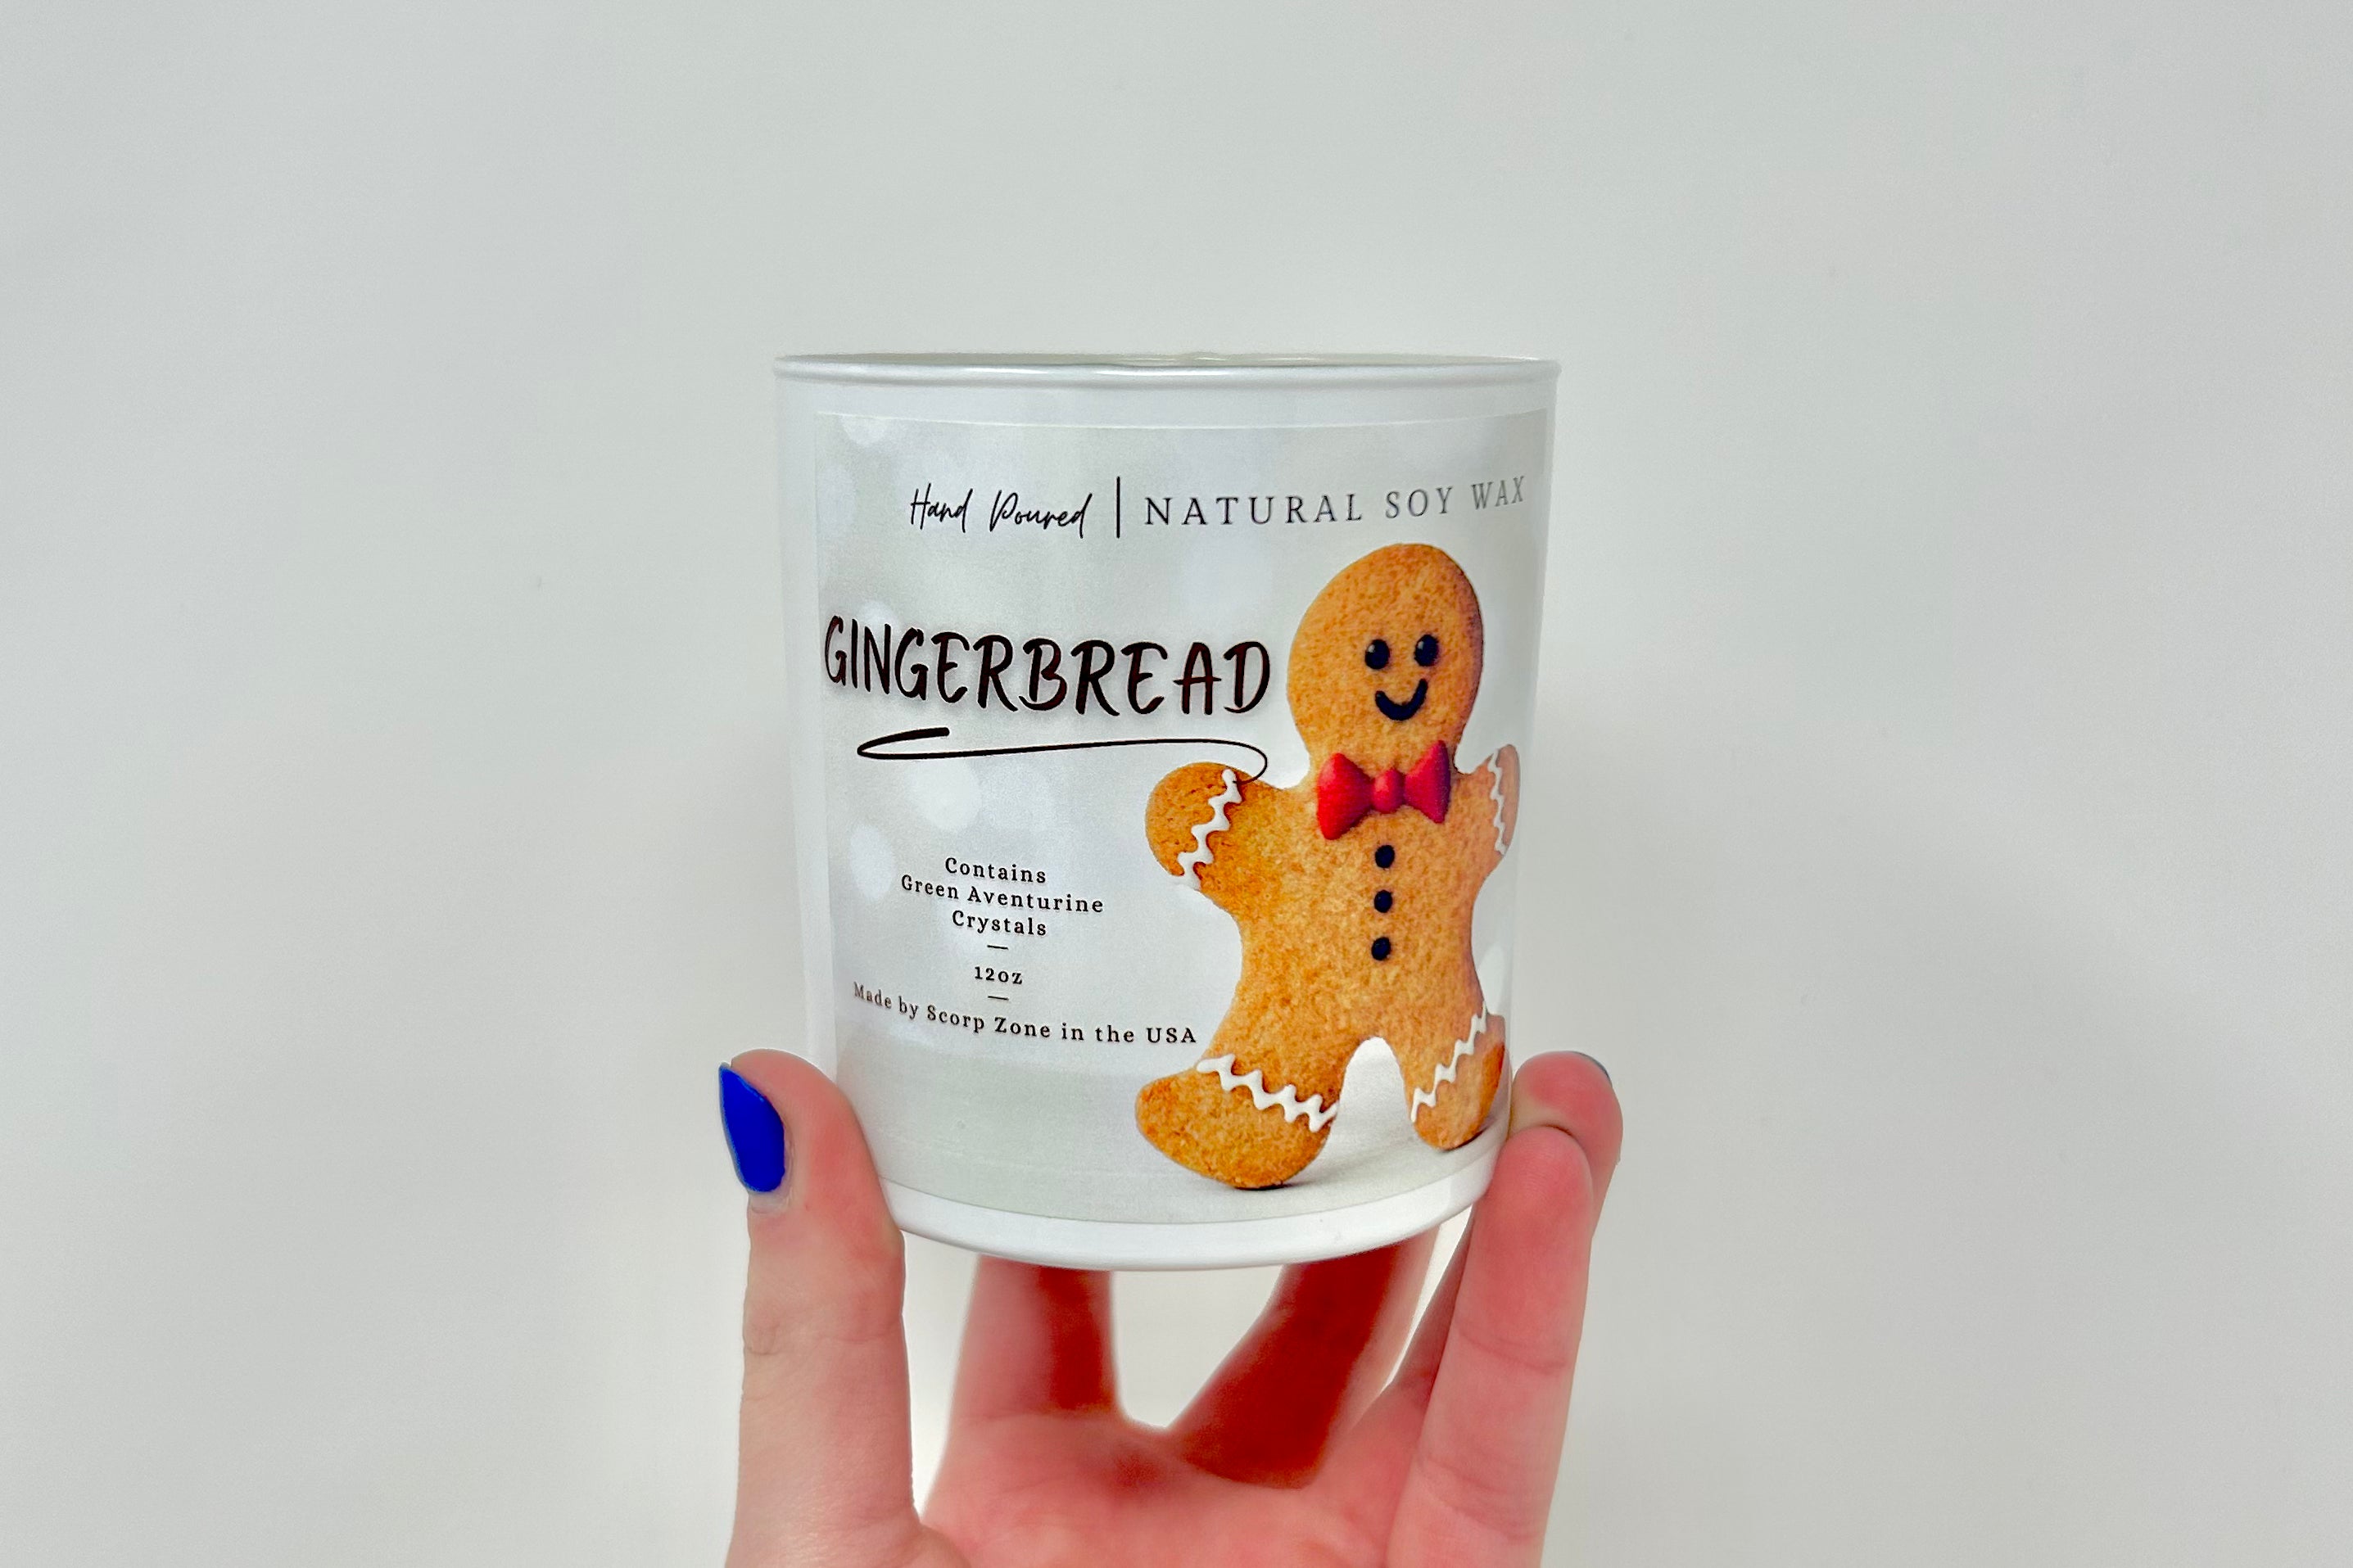 Gingerbread Natural Soy Wax Candle by Scorp Zone